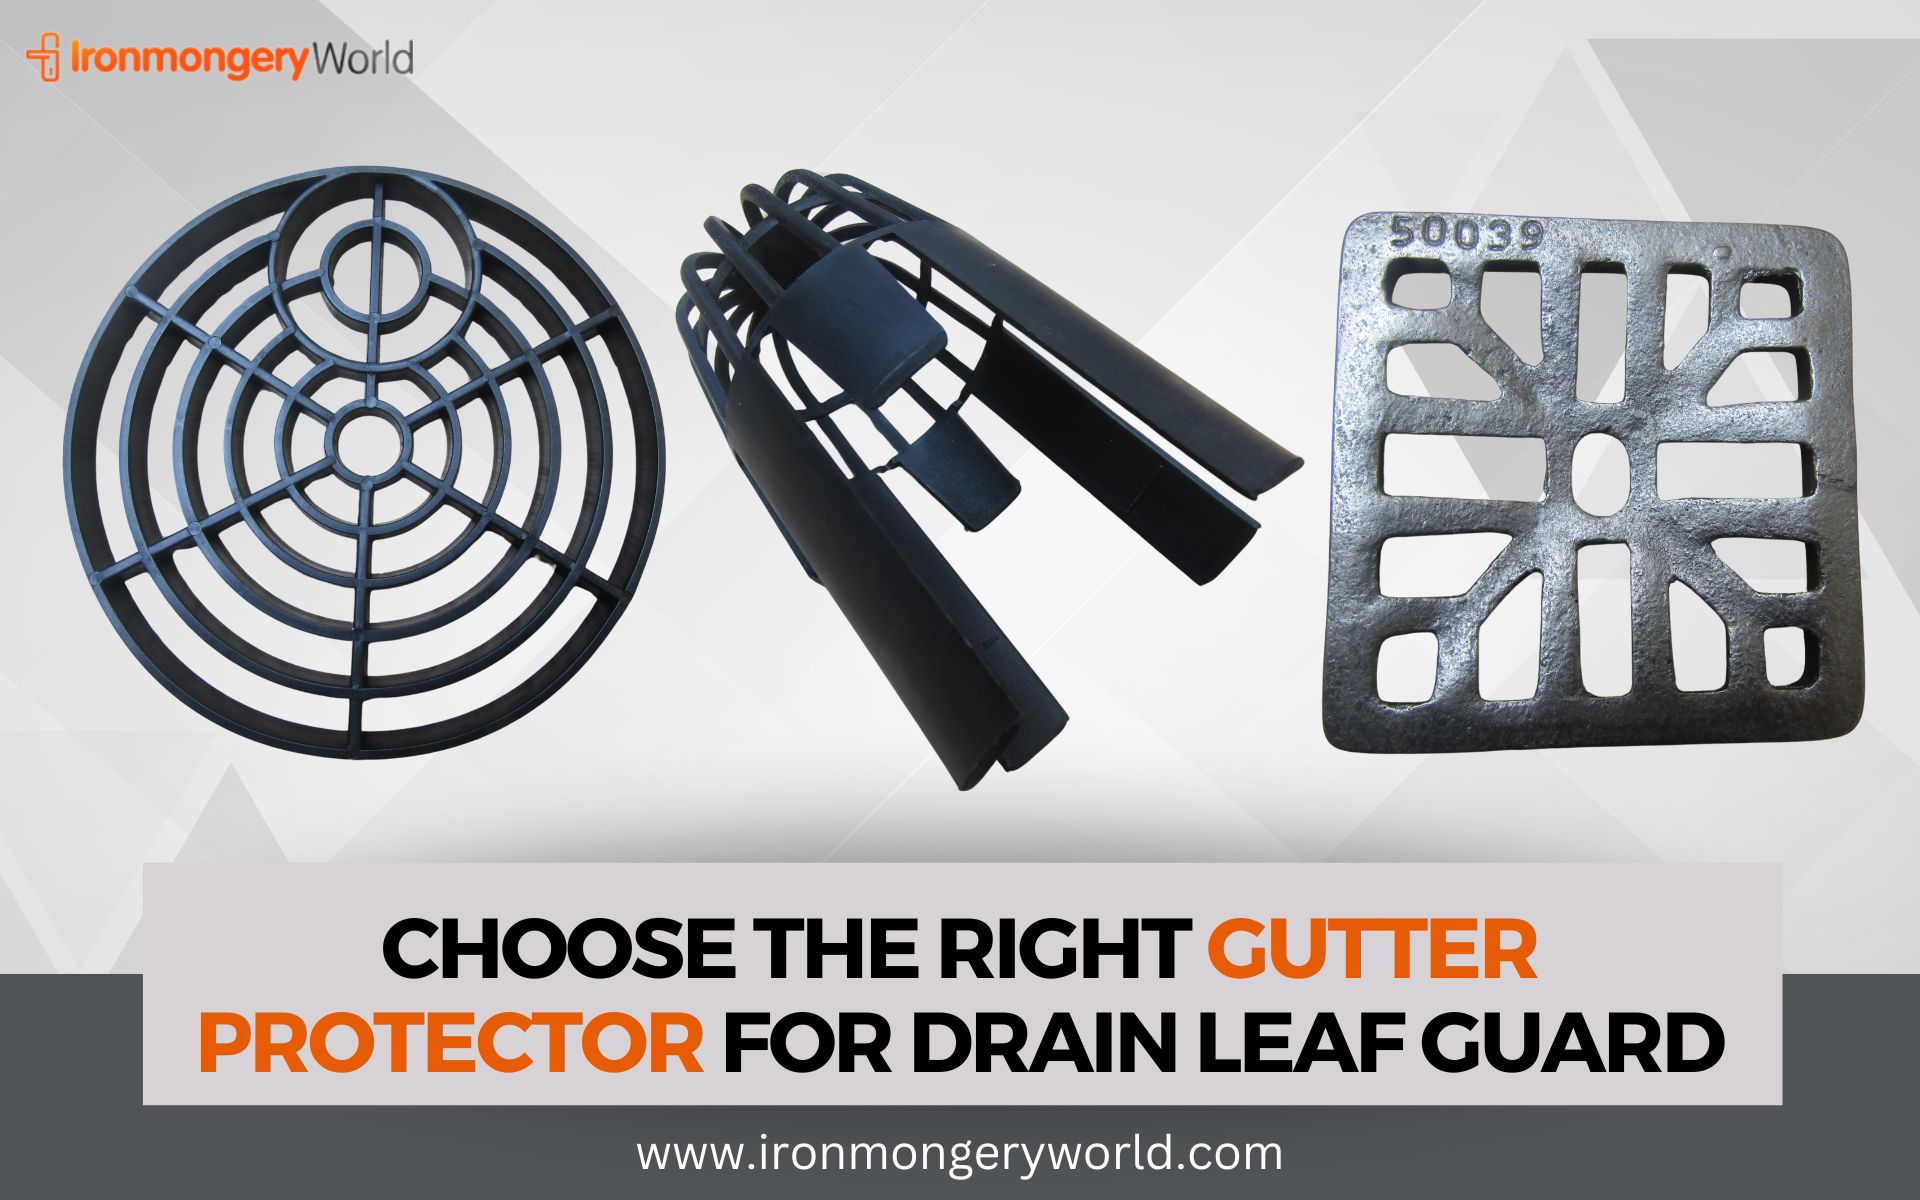 Gutter Protector for Drain Leaf Guard